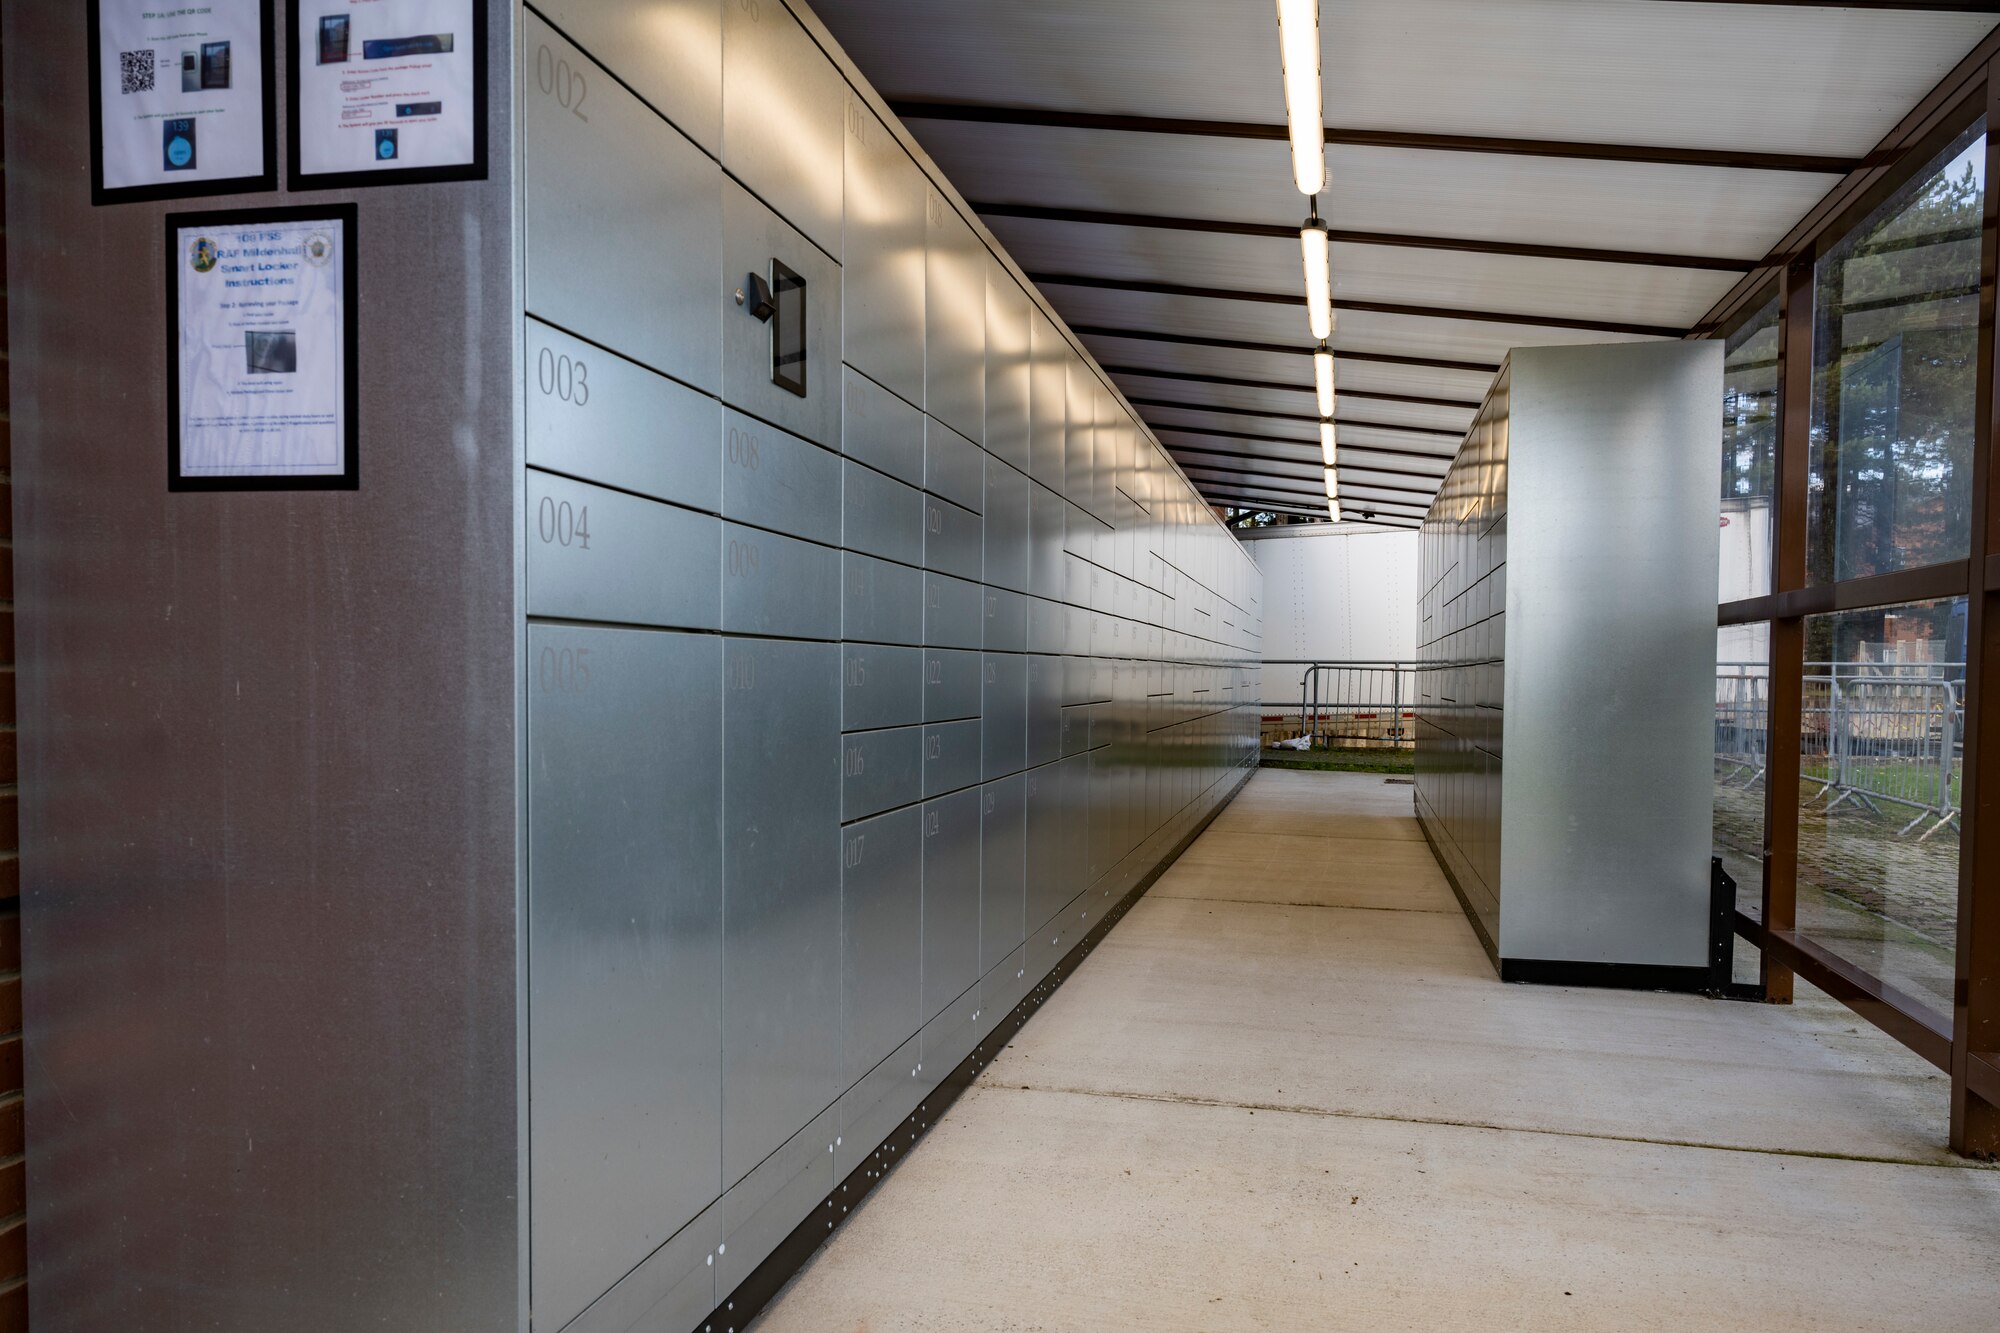 Smart lockers were installed to accommodate 24/7 package pickup for midnight and swing shift workers.